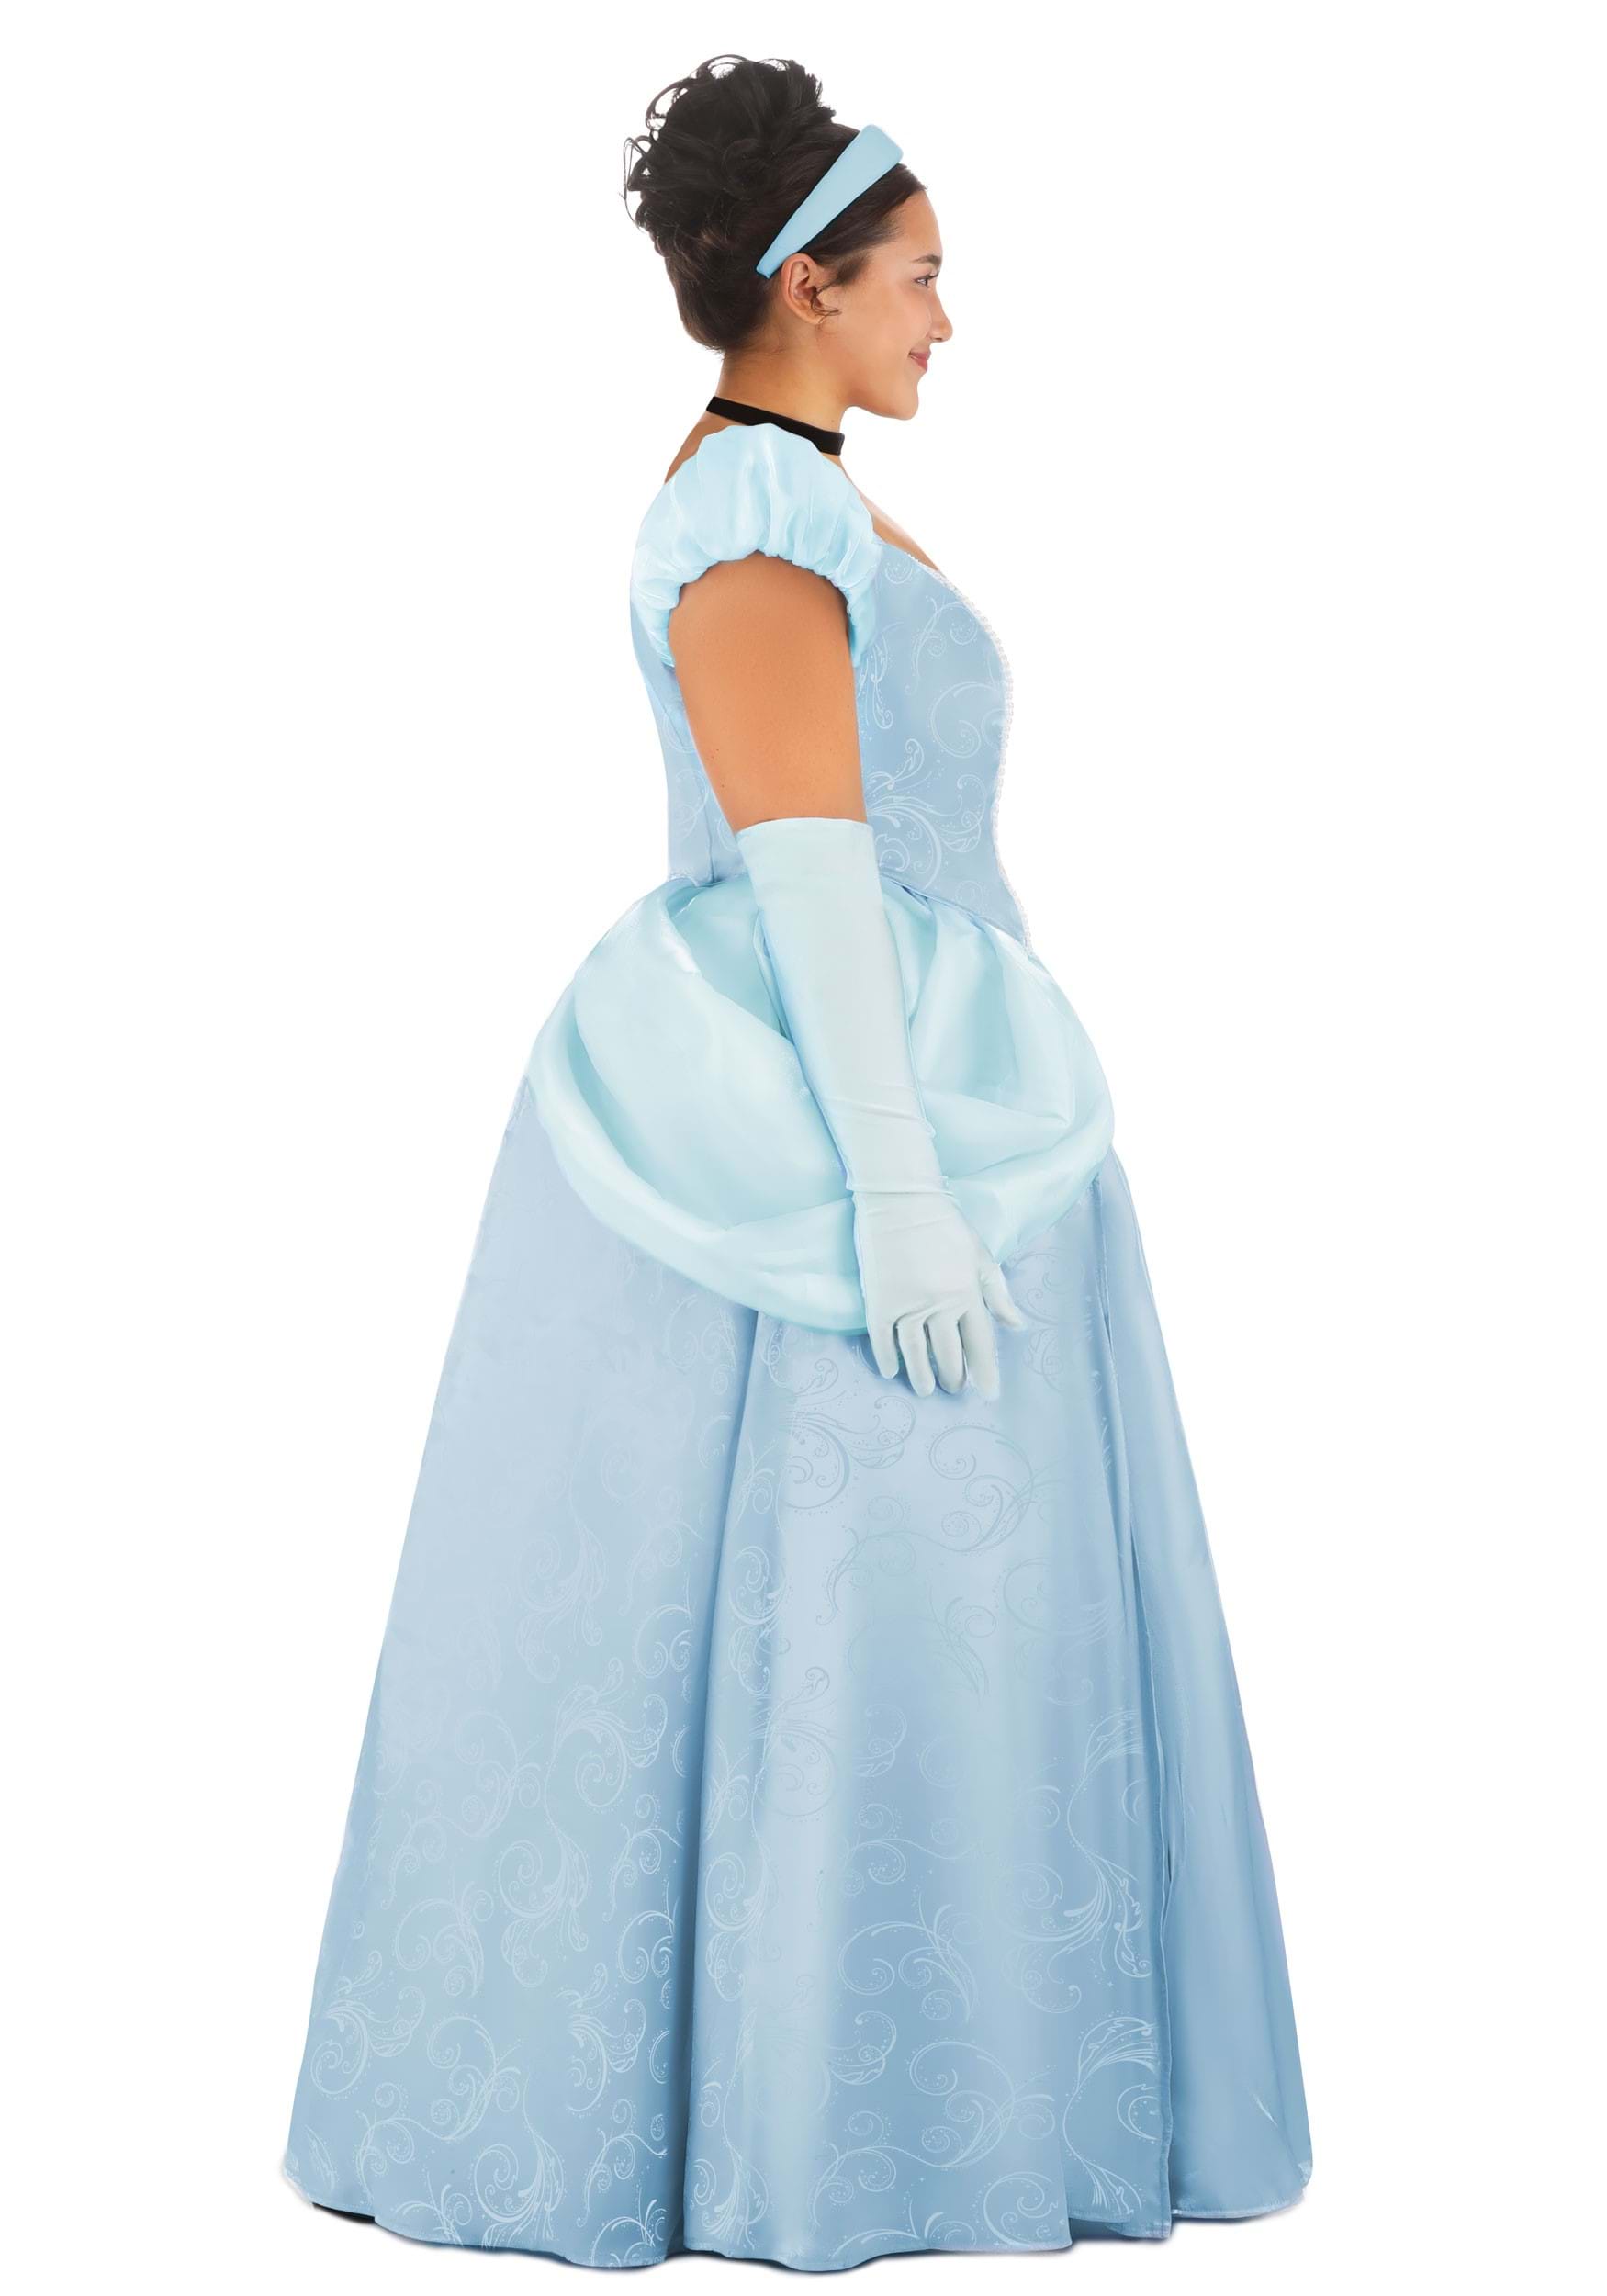 Adult Disney Premium Cinderella Costume Blue Dress Ball Gown Outfit